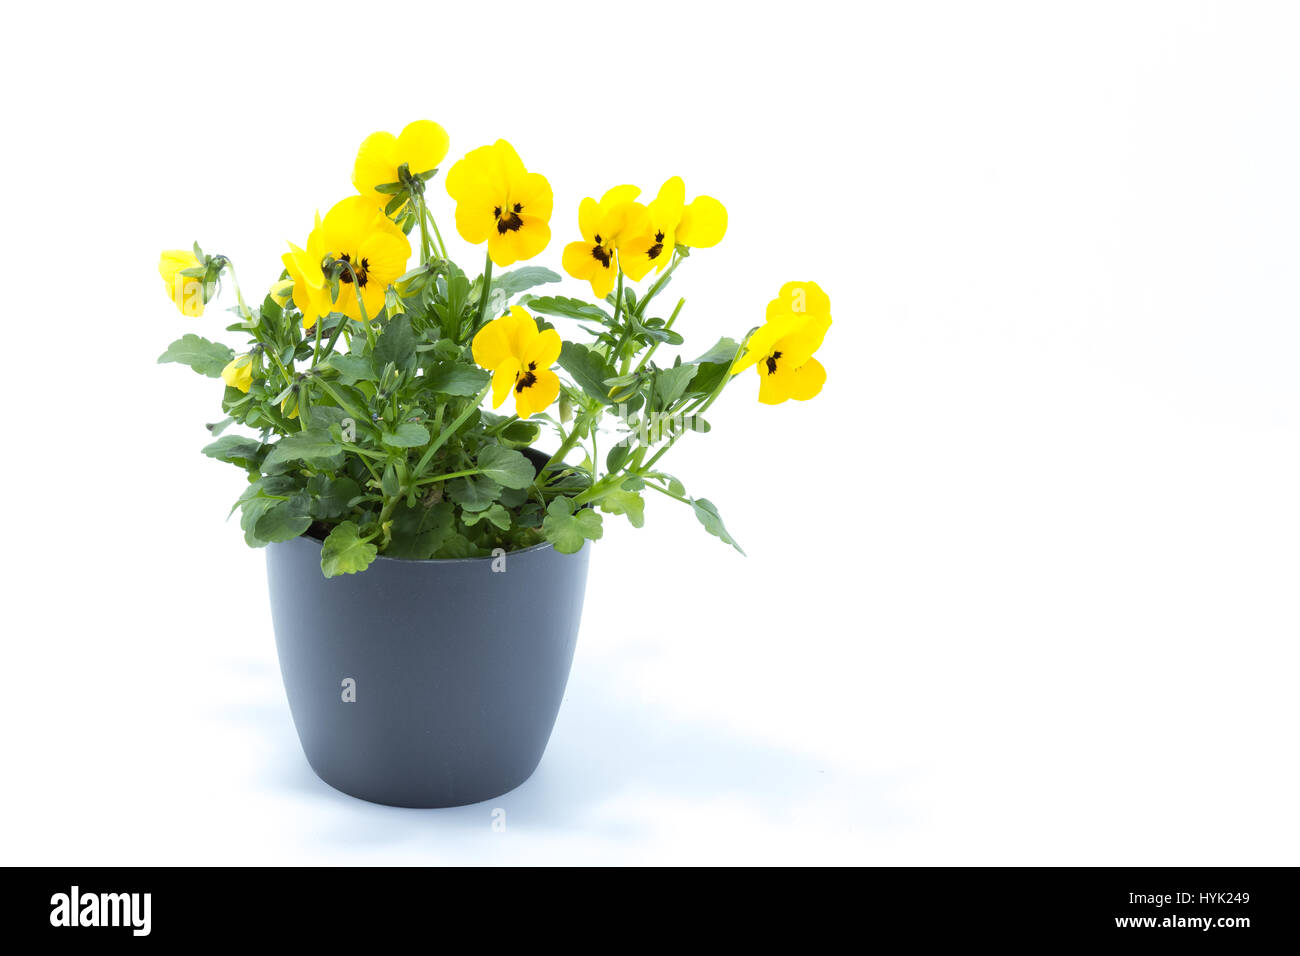 Horned Violet, Yellow Viola, Cornuta planted in a grey pot and isolated in white studio background Stock Photo